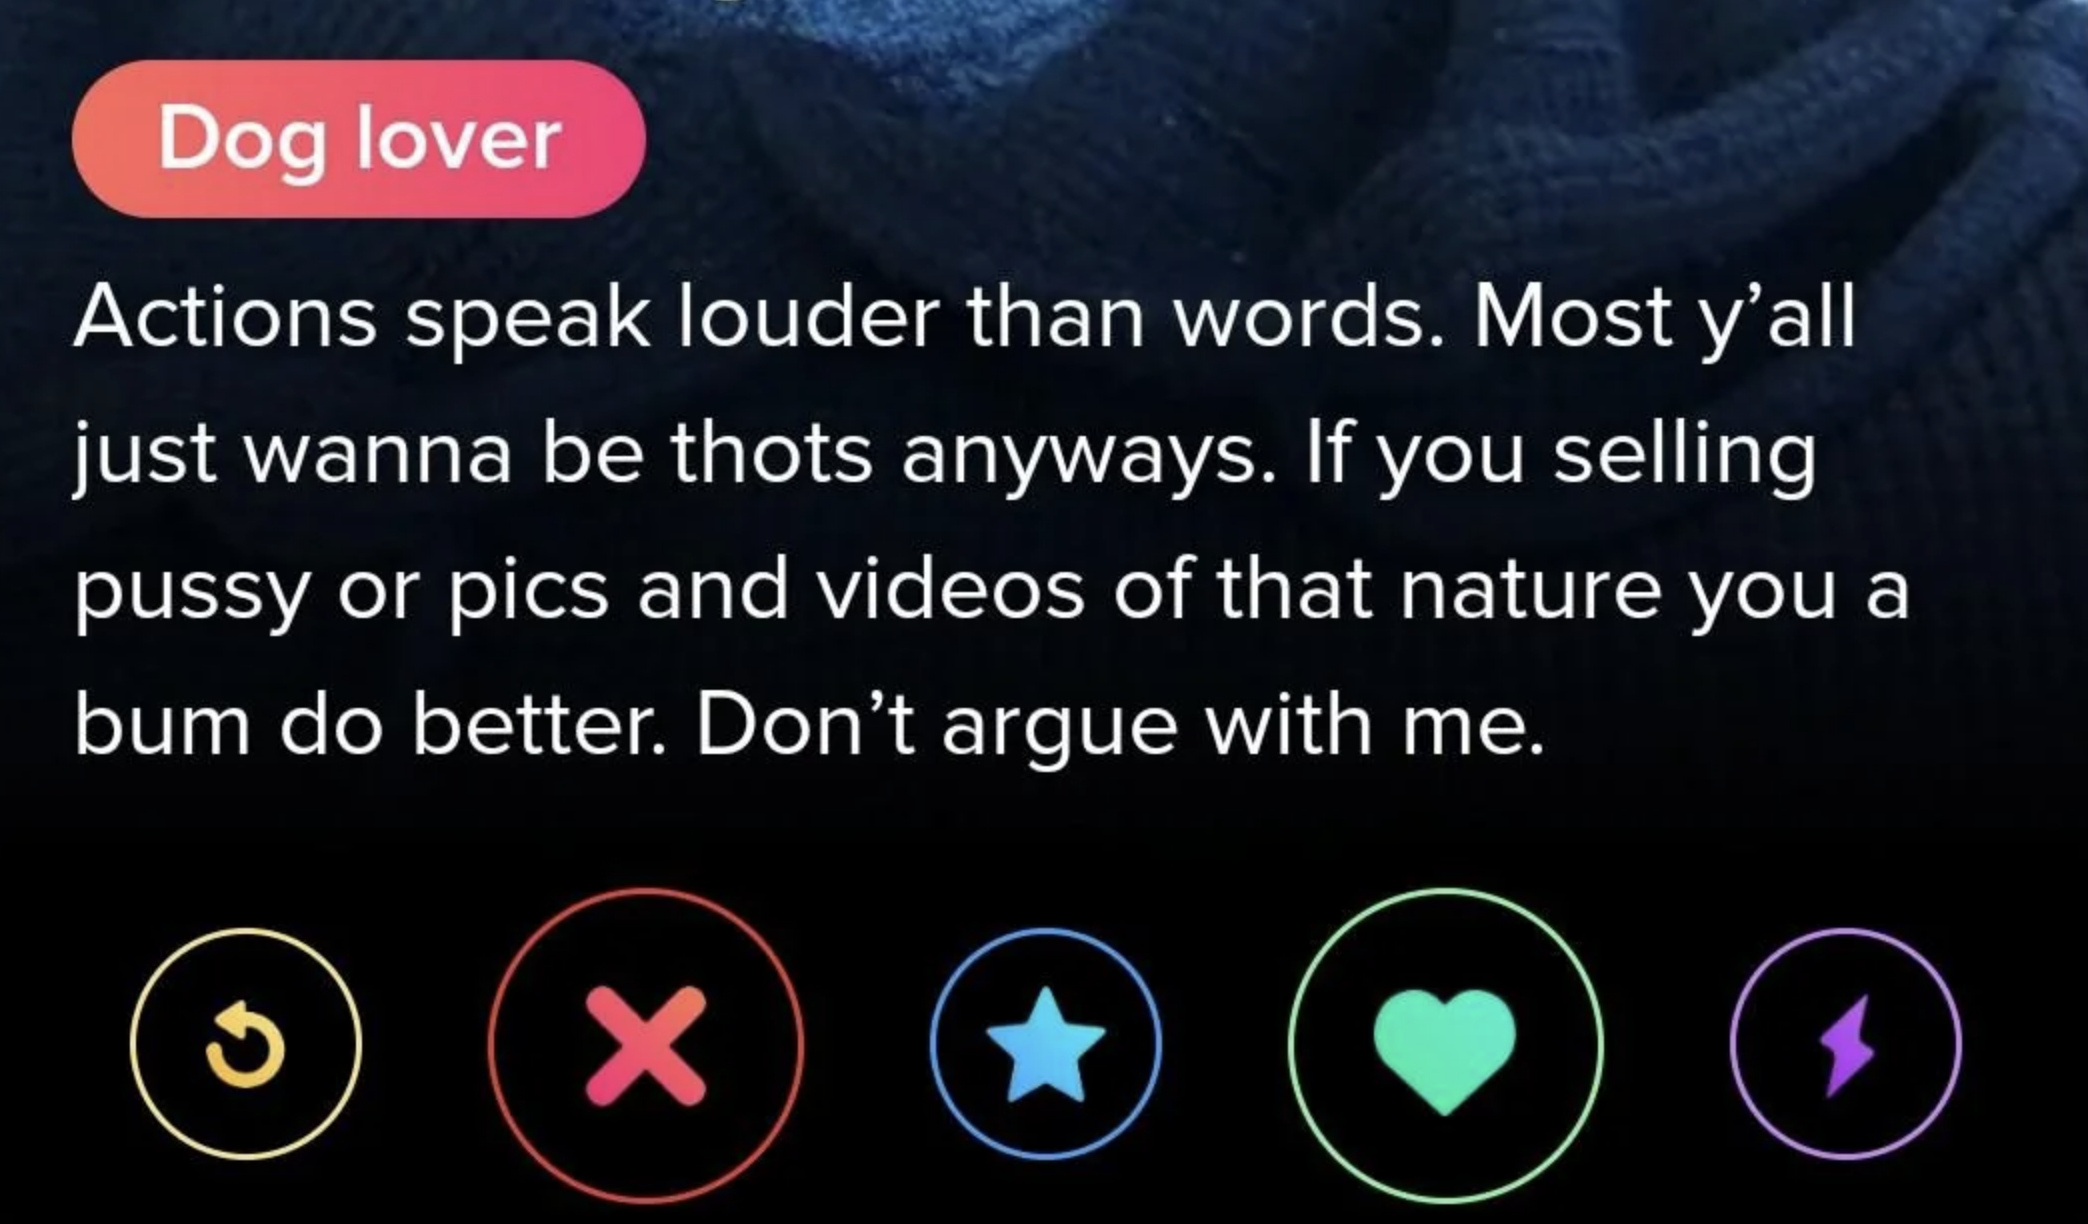 Actions speak louder than words, most y&#x27;all just wanna be thots anyways, if you selling pussy or pics and videos of that nature you a bum do better